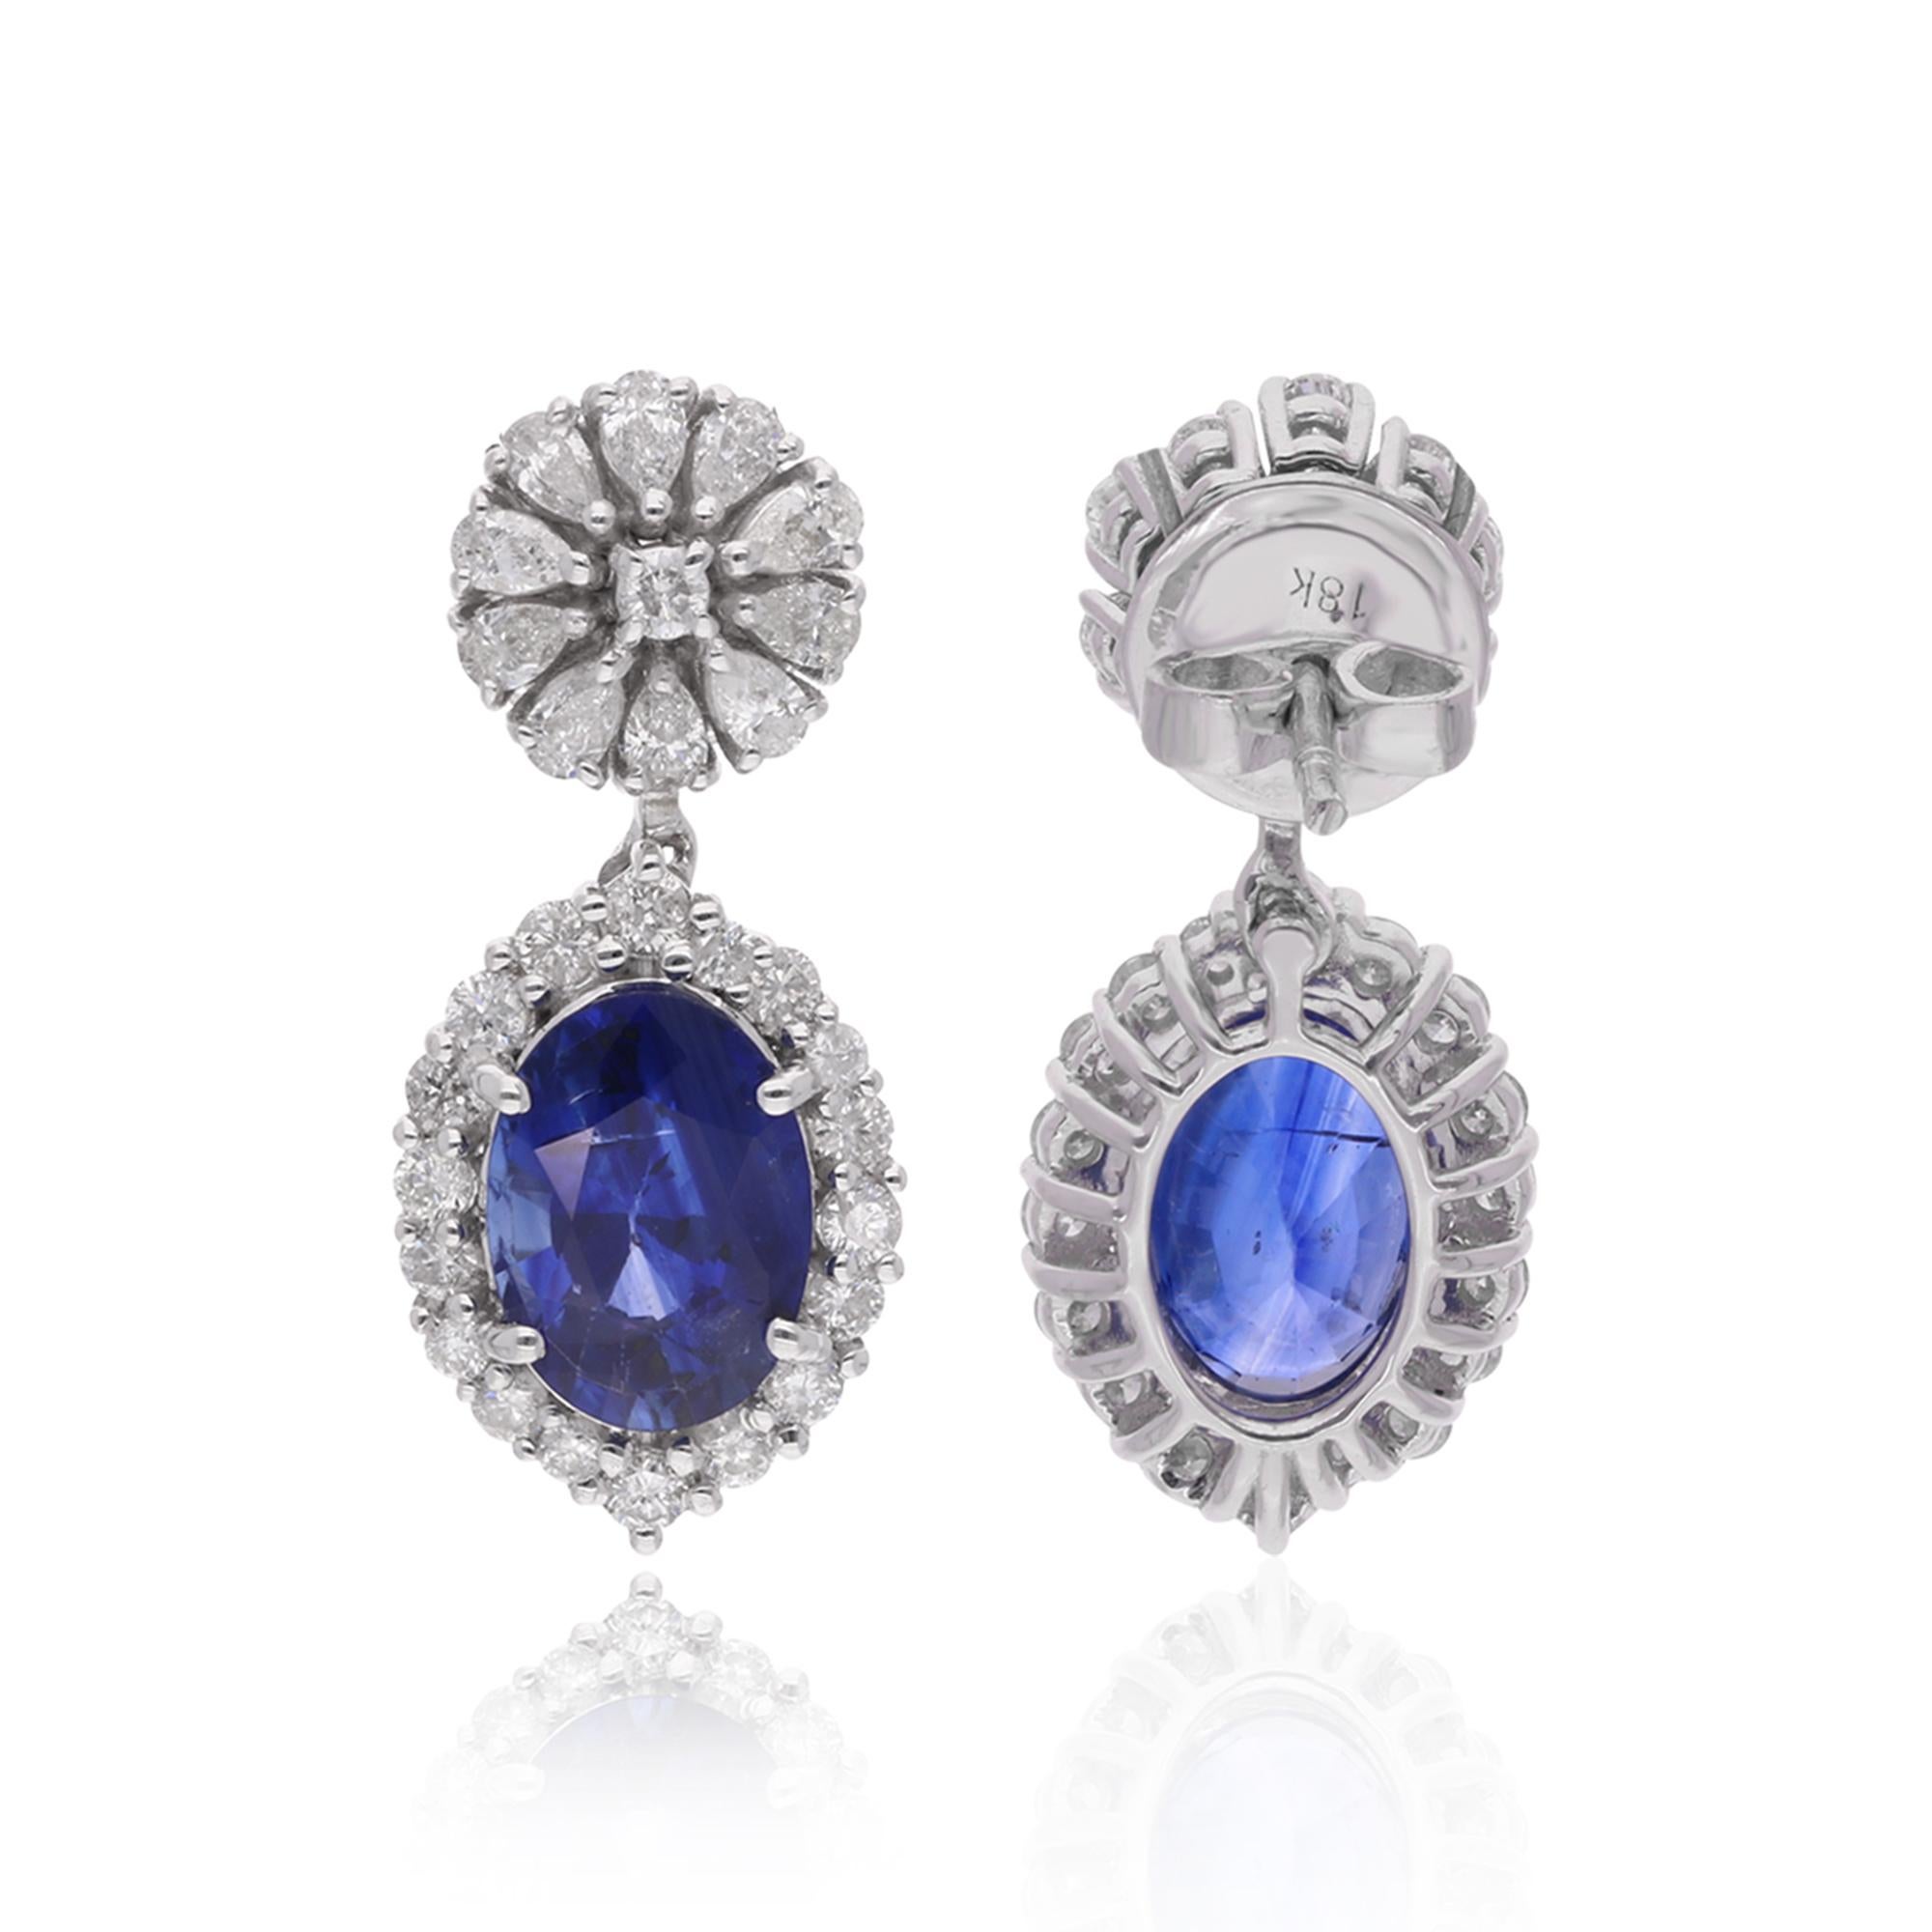 These gorgeous Diamond & Sapphire Drop Earrings are the perfect blend of classic and contemporary styles. Crafted from 18k solid white gold, each earring features a stunning Sapphire encircled by a halo of brilliant, sparkling diamonds. These